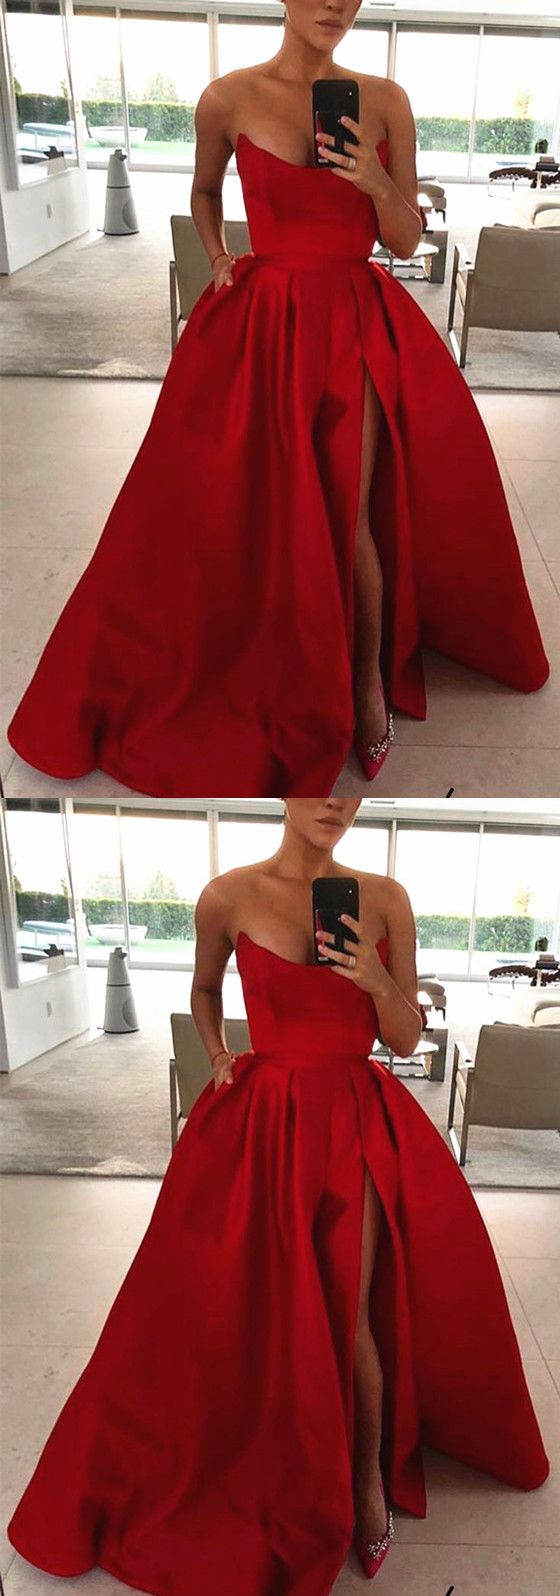 Off Shoulder Side Split Long Prom Dress Ball Gown Fashion Crew-neck Women Pricess Evening Party Gowns , Plus Size Satin Formal Party Gowns